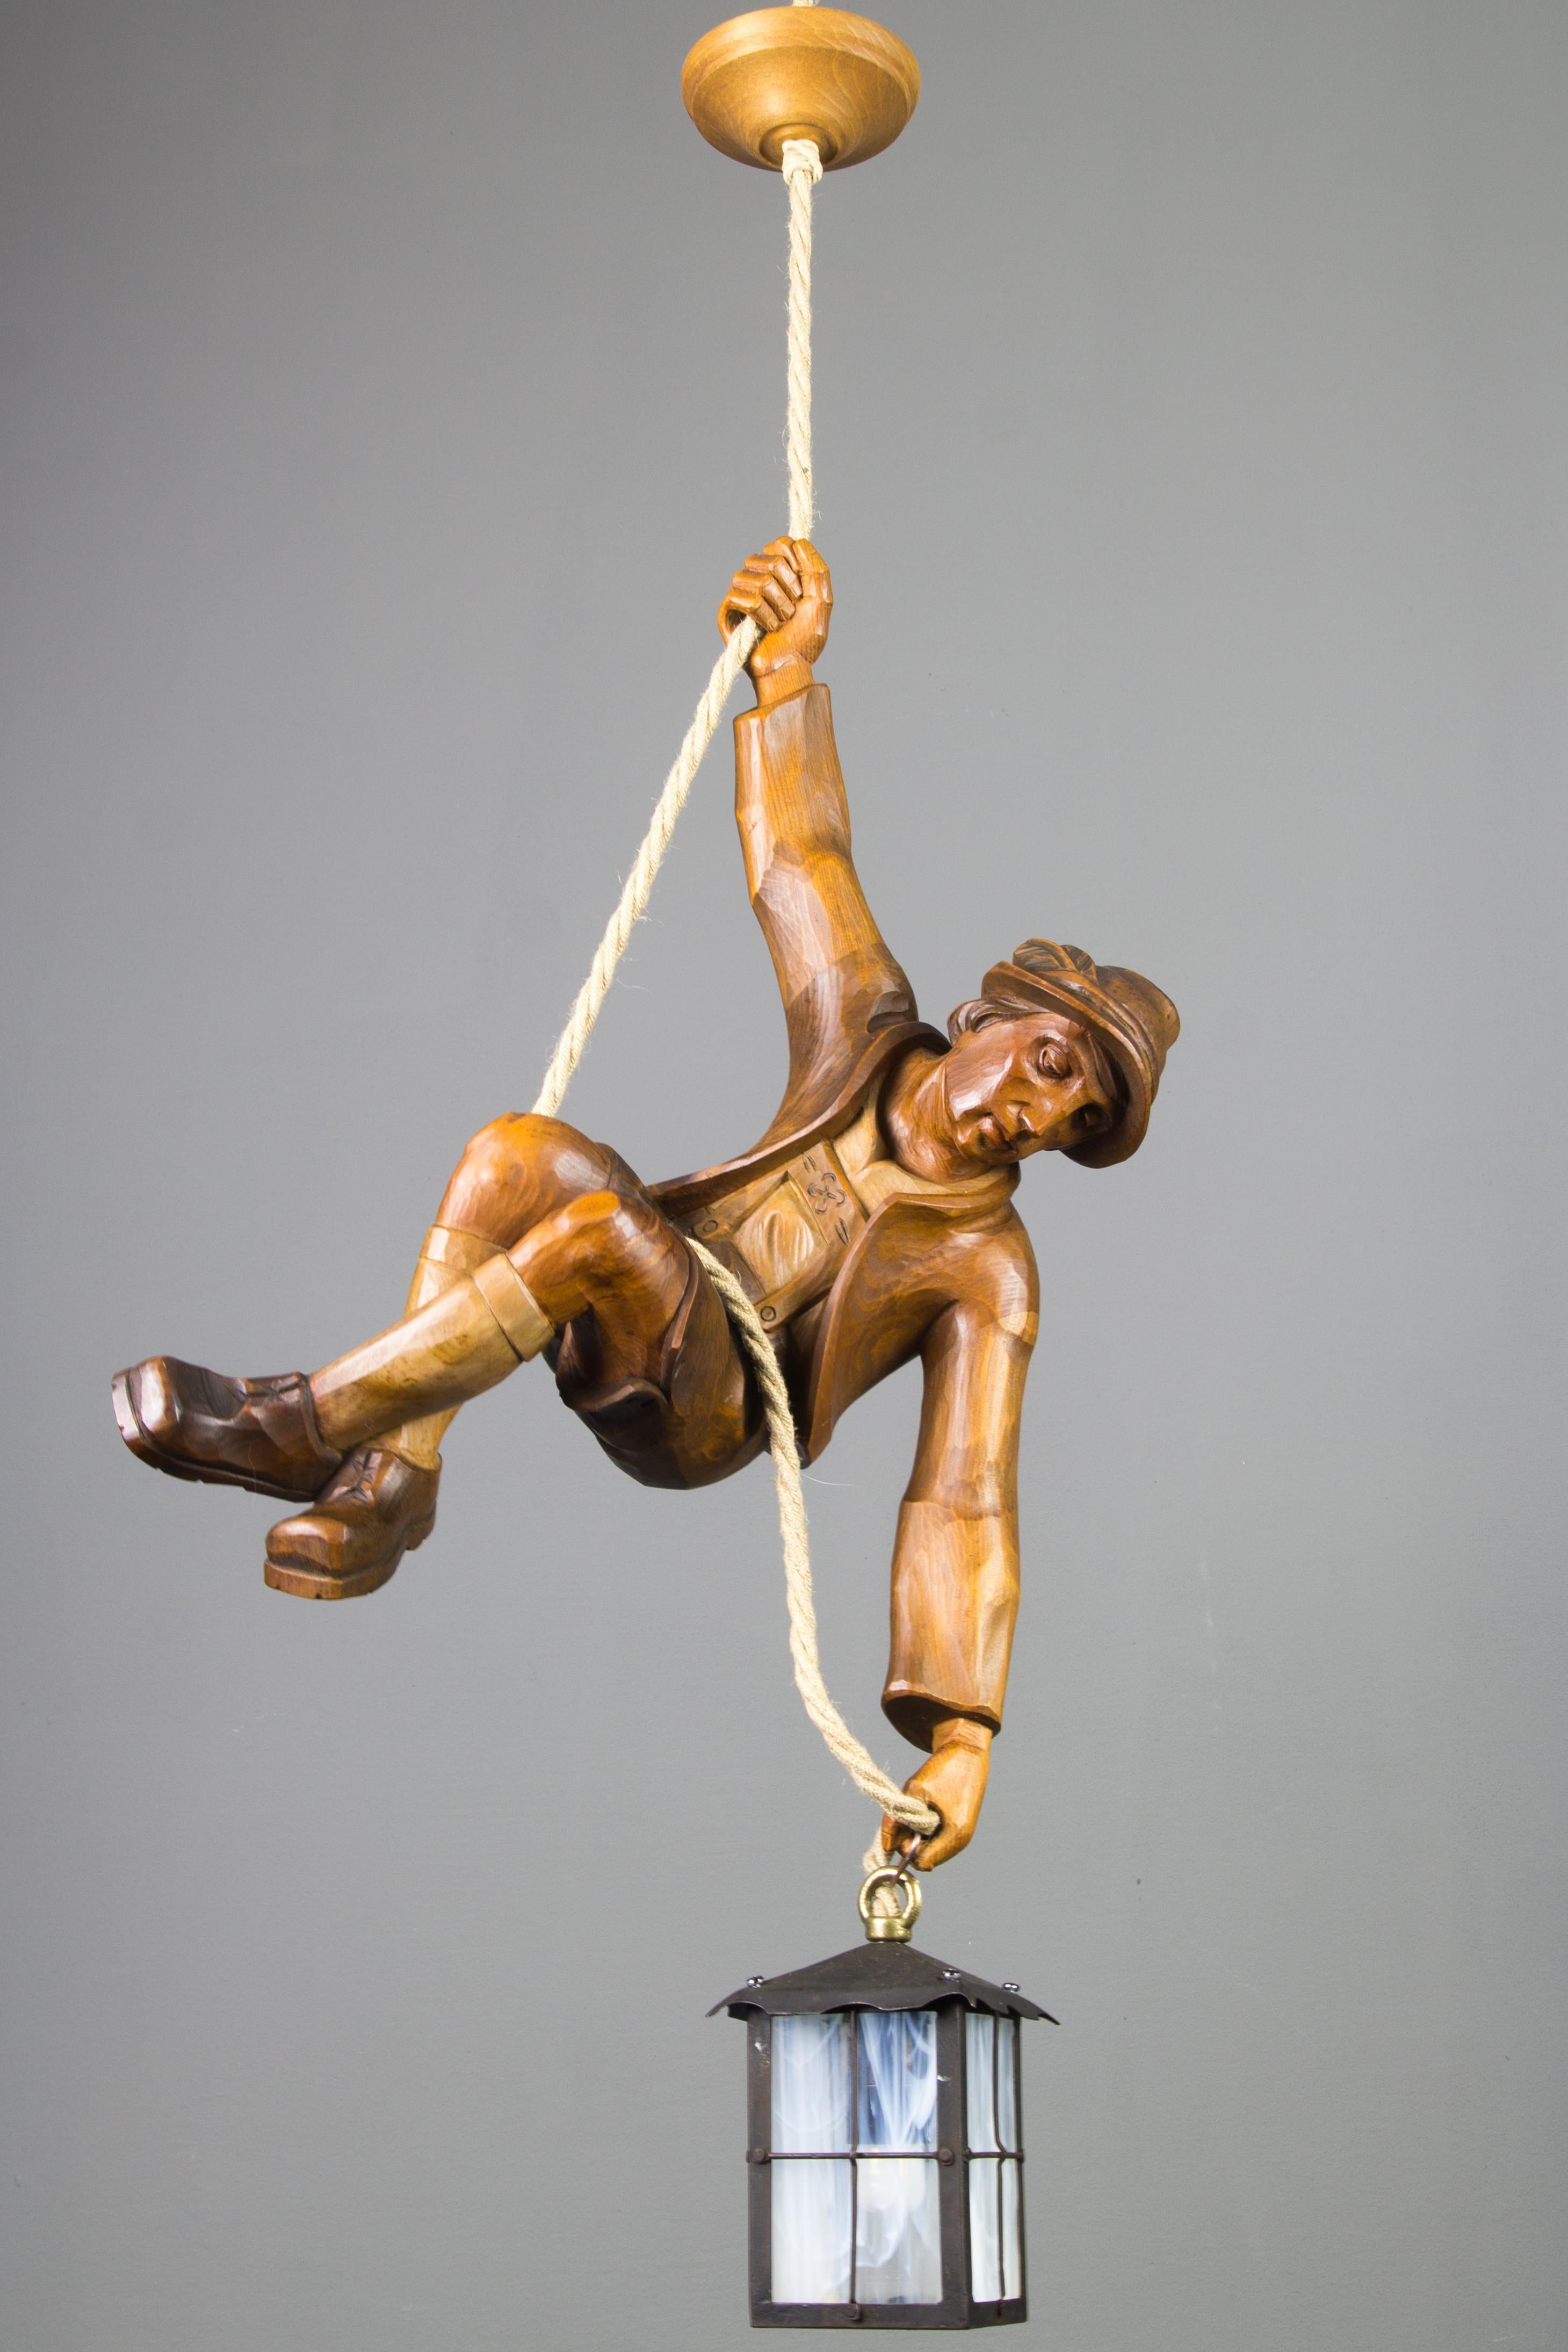 Wonderful German figural pendant lamp features a hand carved figure of a mountain climber. The detailed carved wooden mountaineer is holding onto a rope and holding a lantern in one hand. The figure is in beautiful brown colors and the lantern